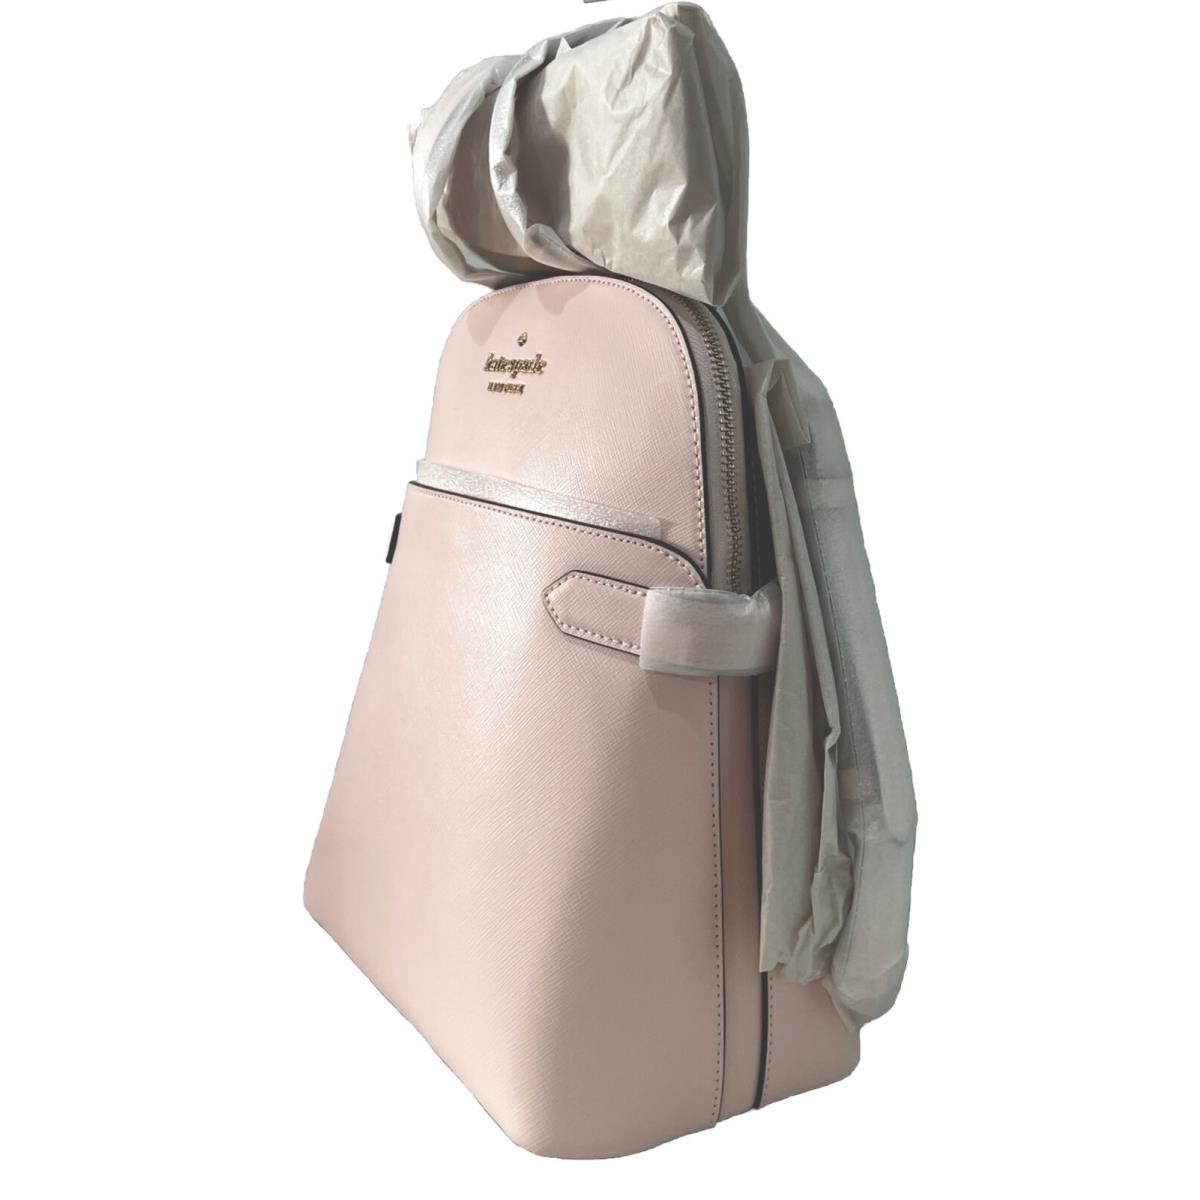 Kate Spade Staci Dome Zip Backpack Pink Saffiano Leather New